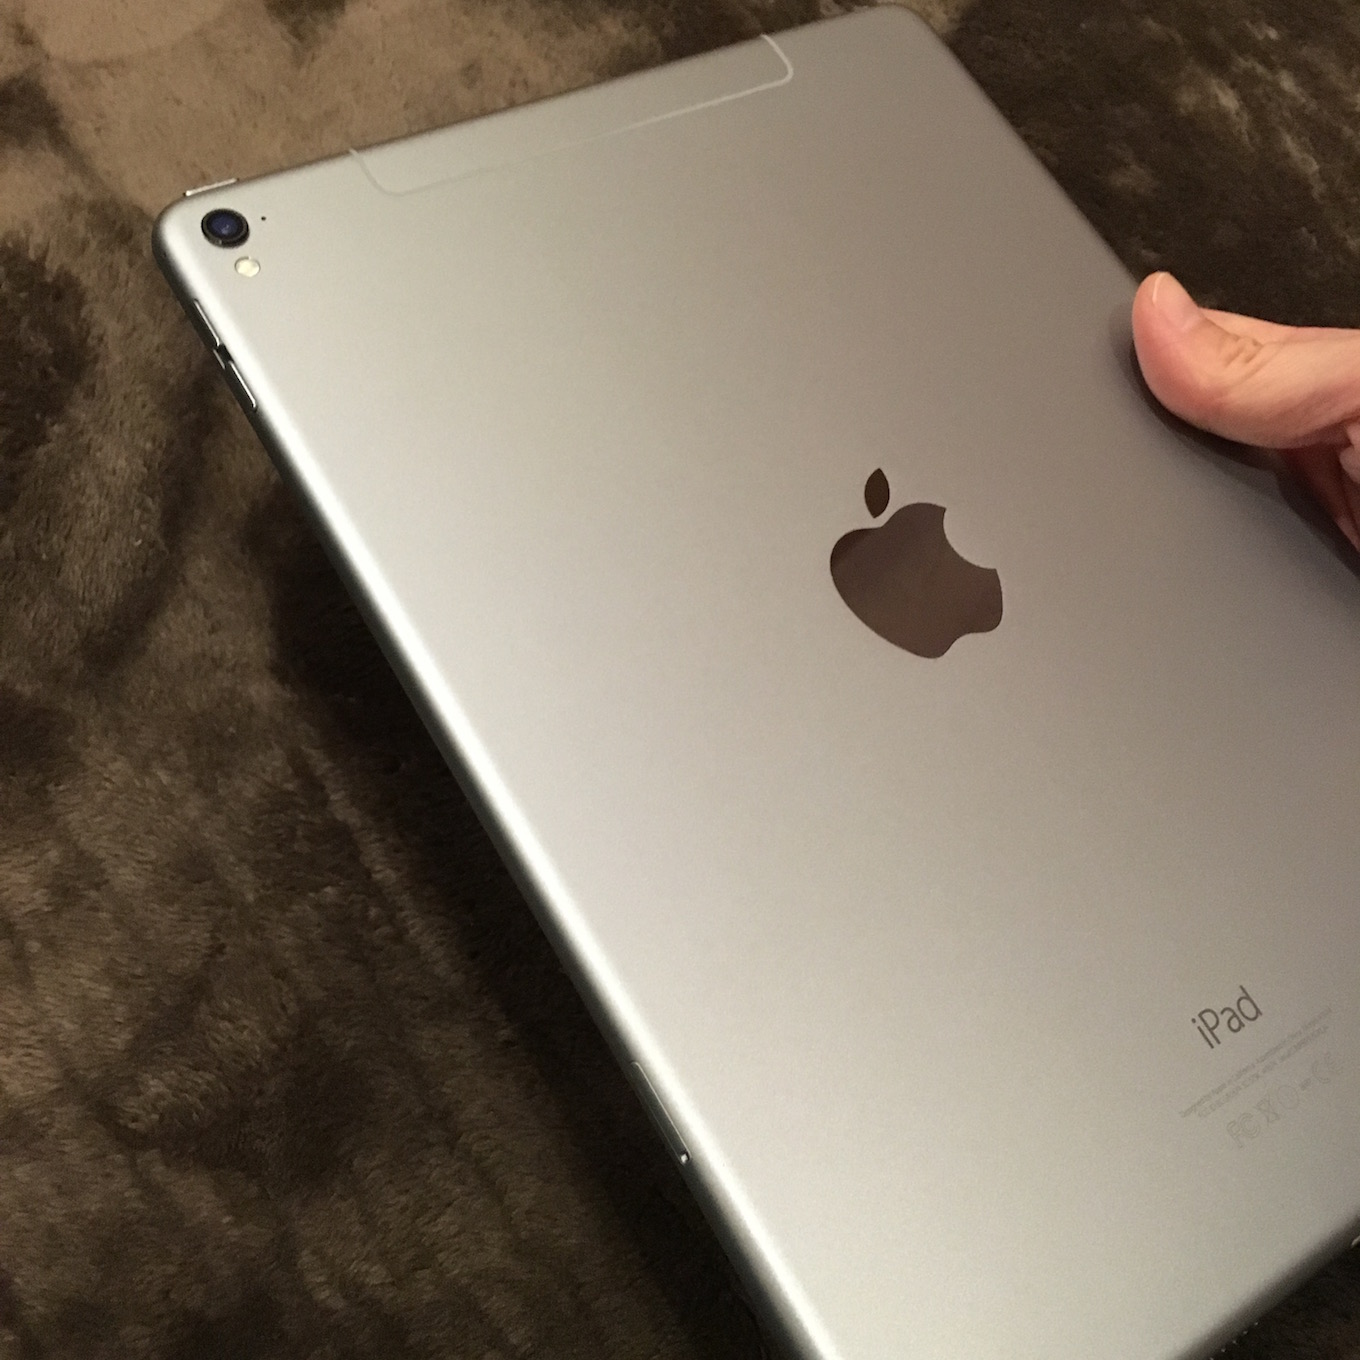 9.7inch_ipad_pro-review6